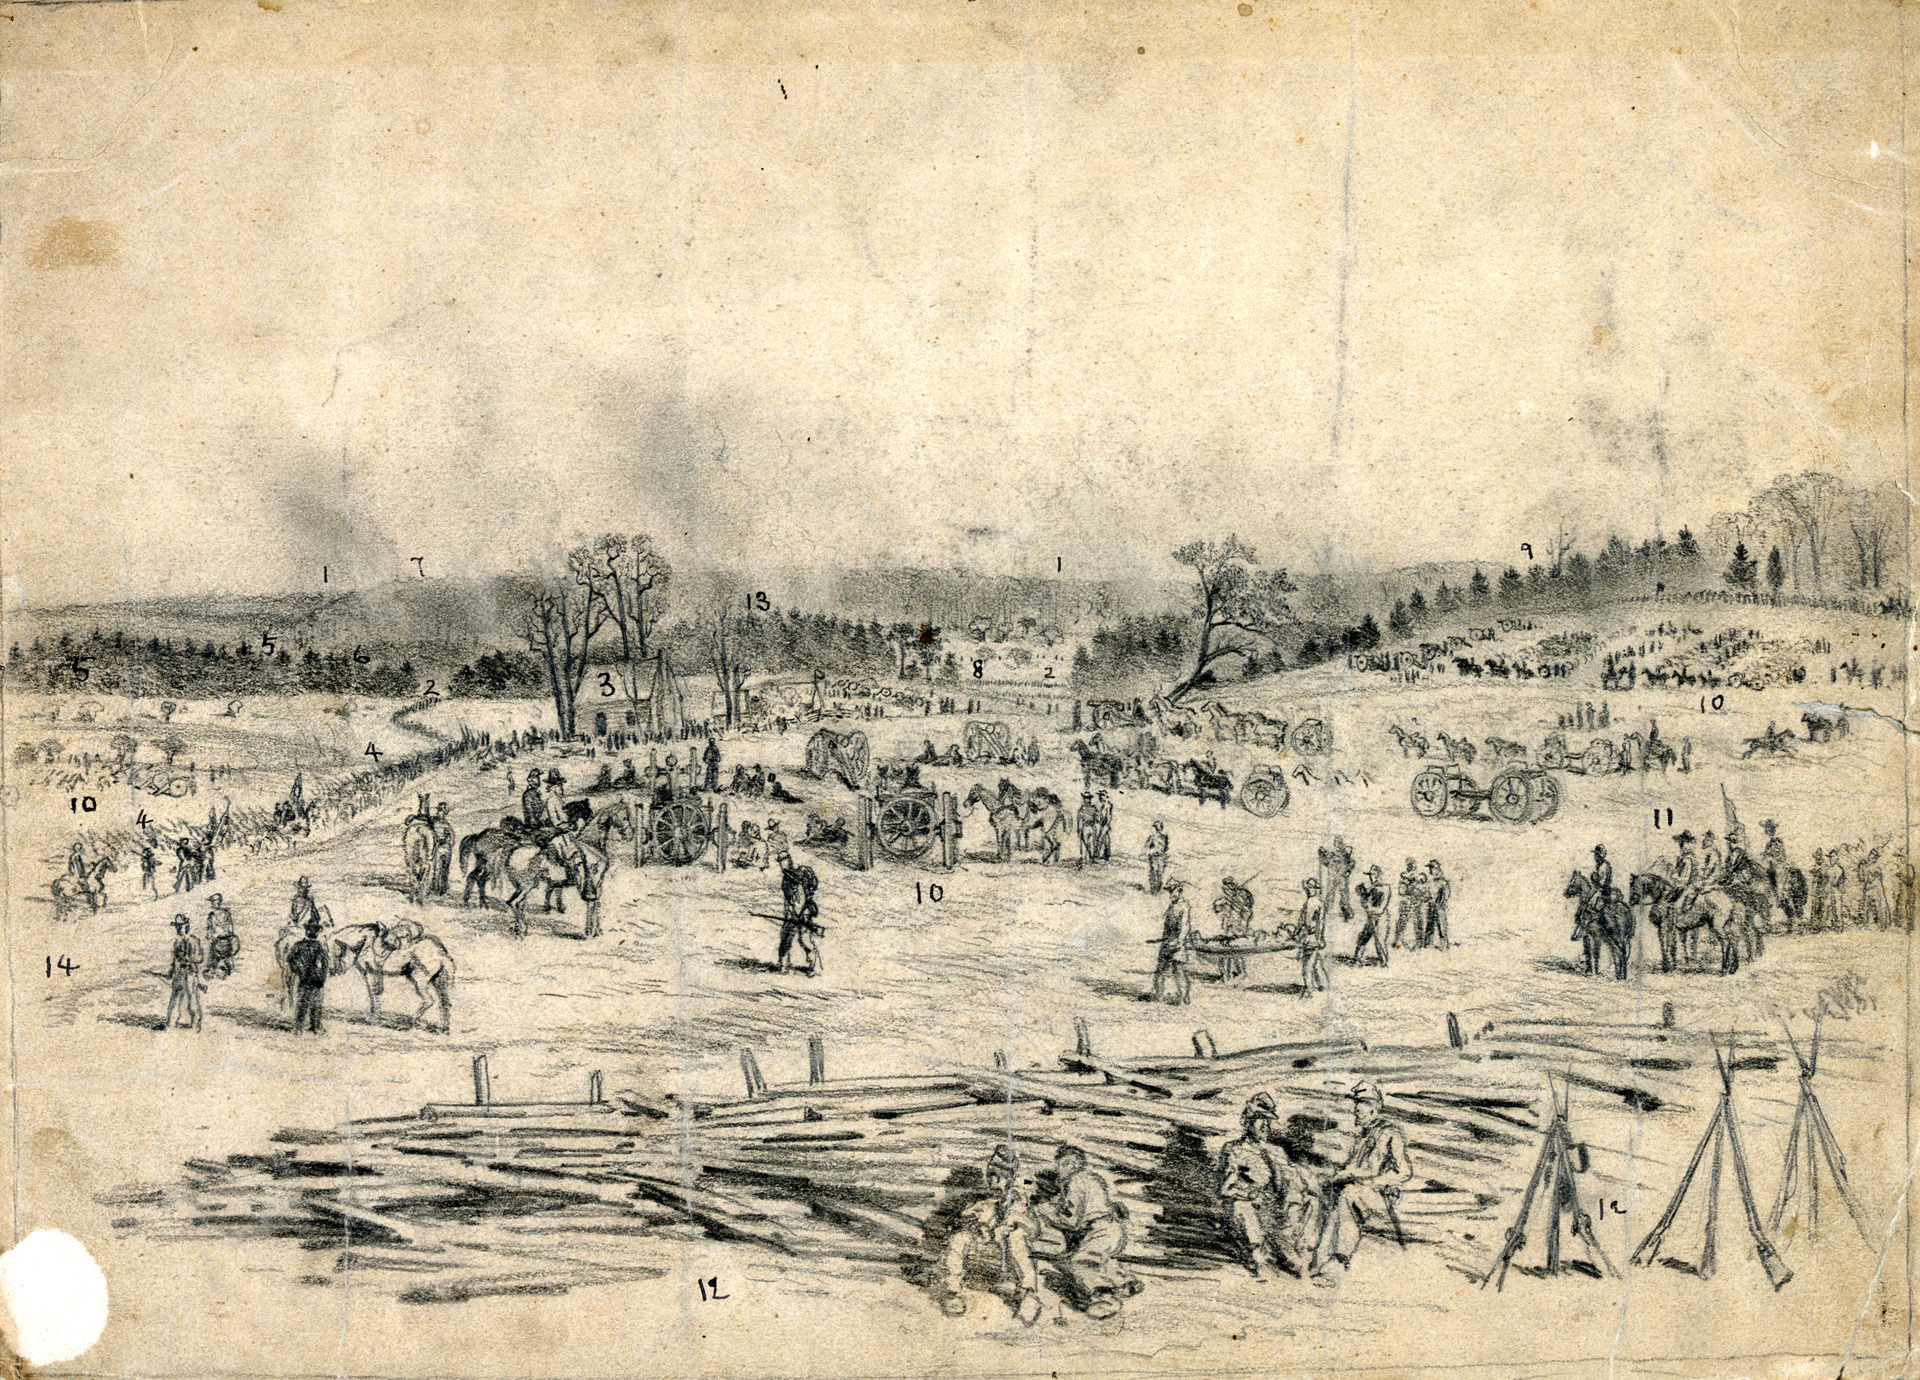 Confederate General Robert E. Lee’s troops built a long line of earthworks at Spotsylvania to defend their position against repeated Union assaults. Battlefield artist Edwin Forbes sketched this view of the battlefield from the Union center.